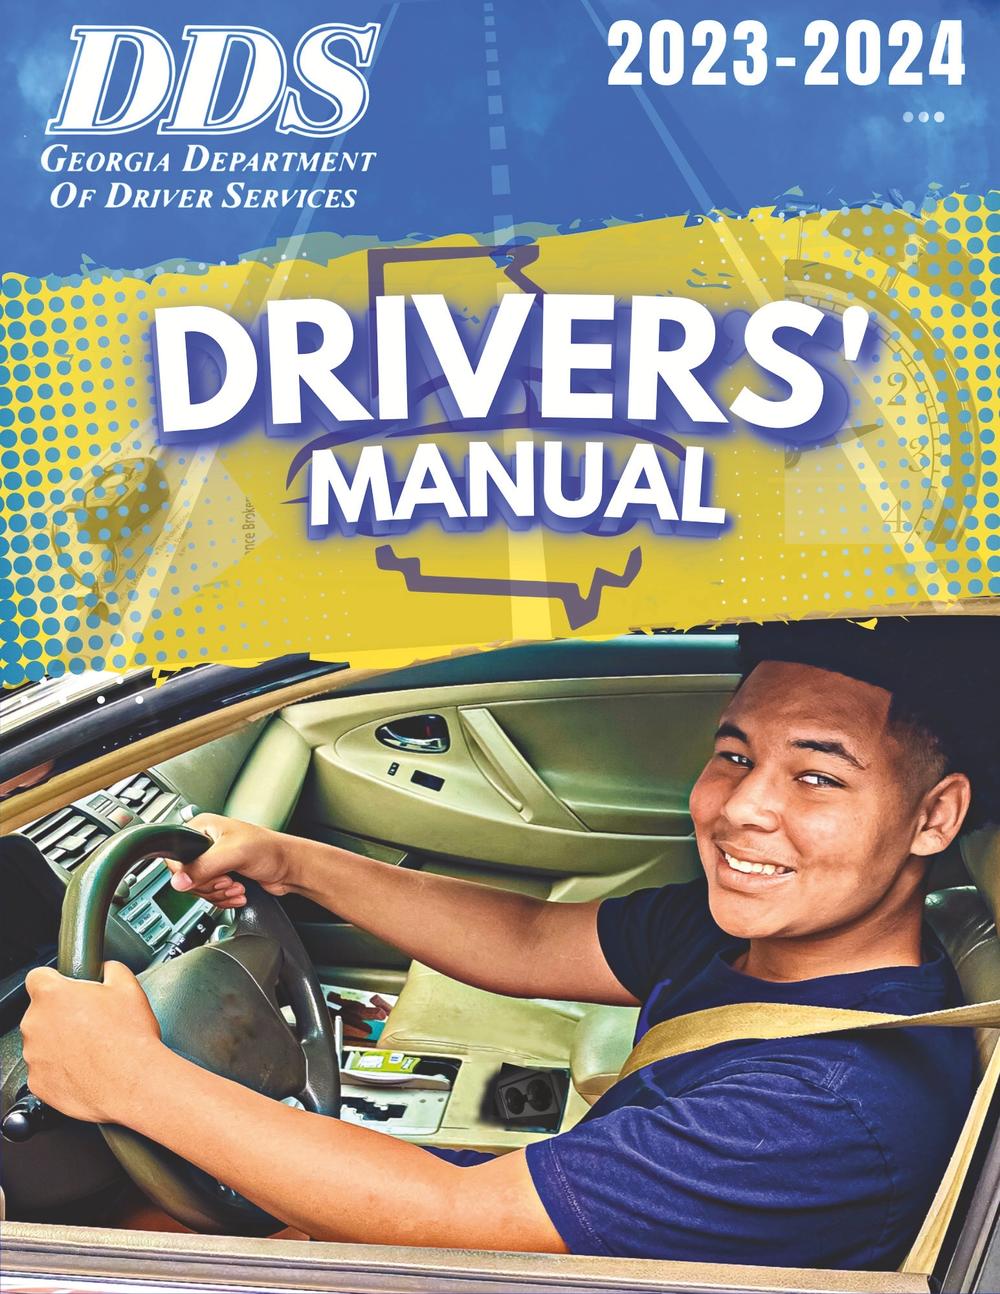 Georgia Department of Driver Services (DDS) Drivers' Manual 2023 to 2024